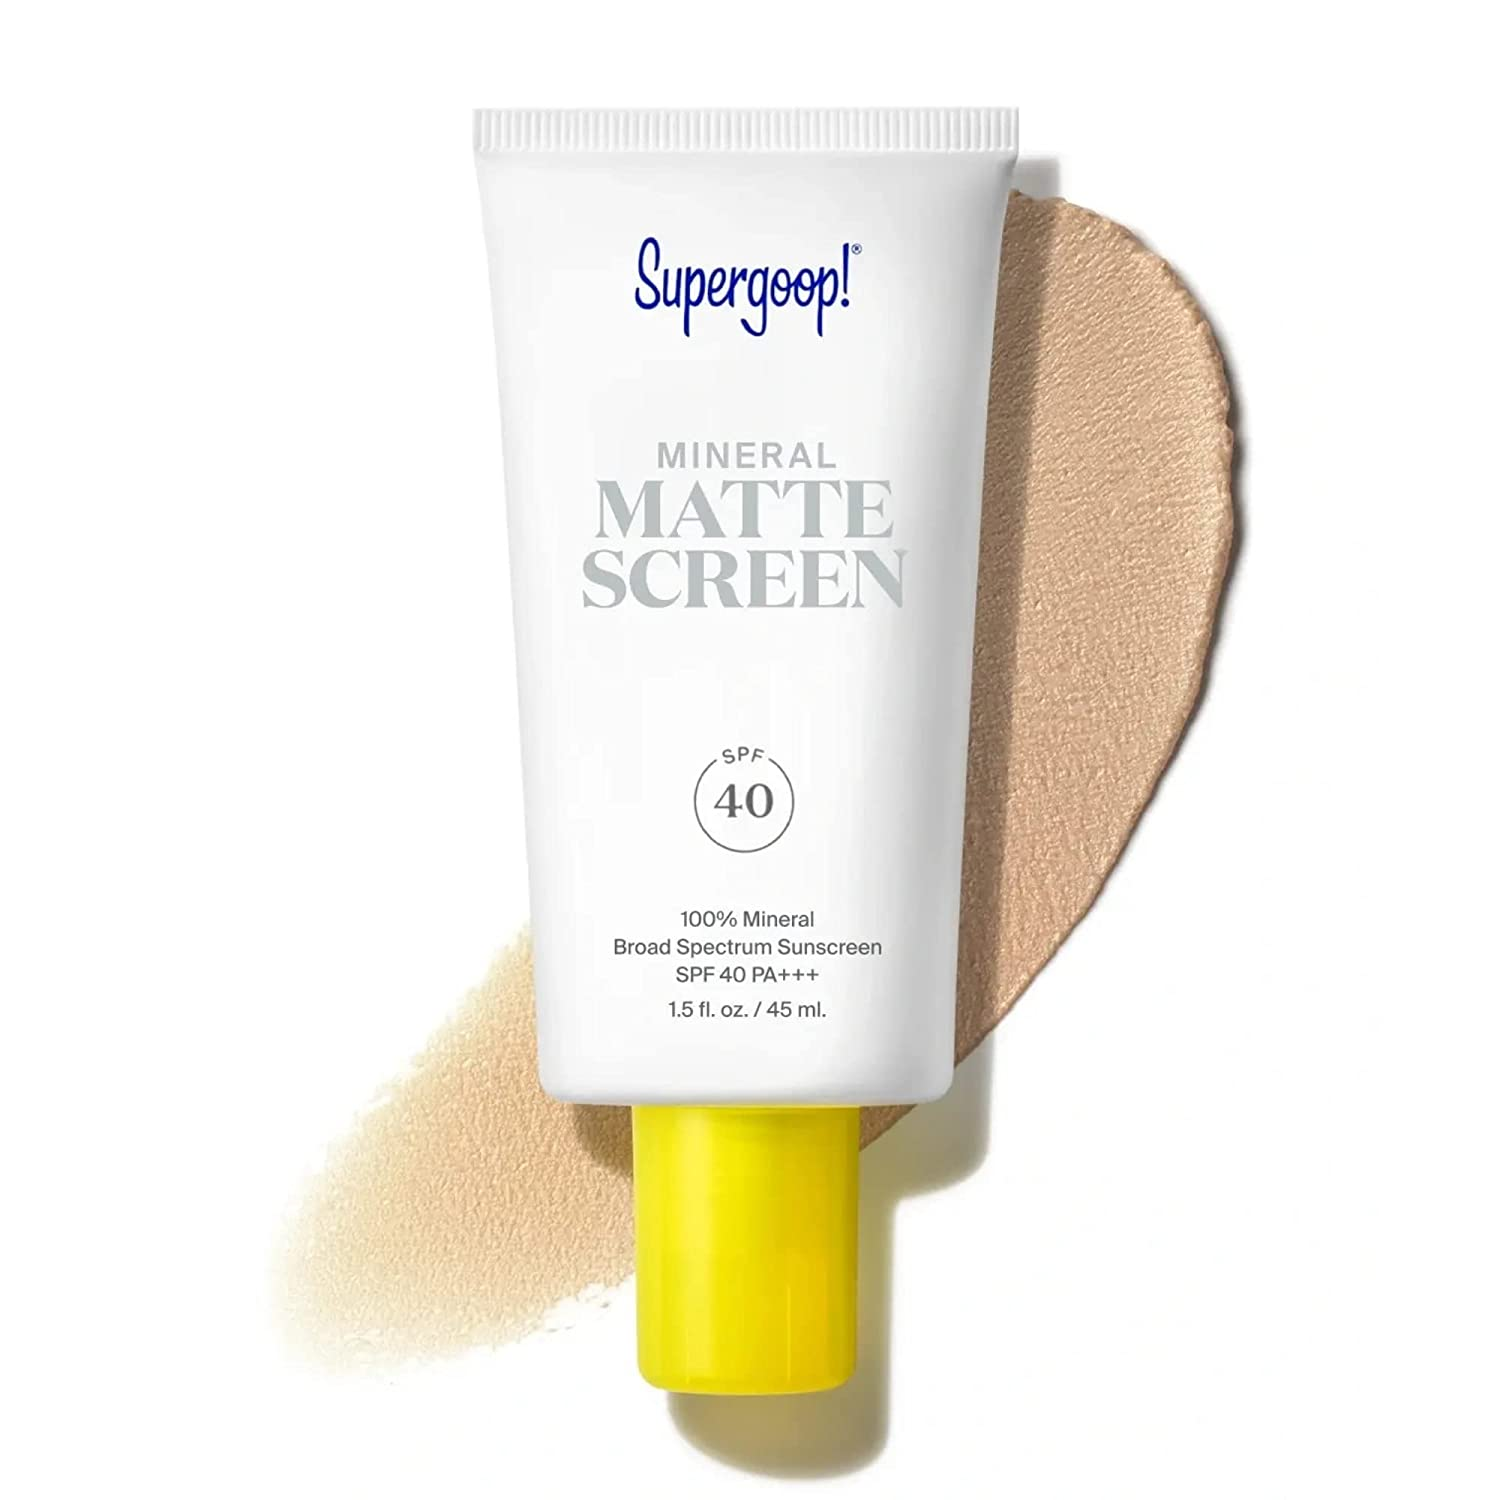 Supergoop! Mineral Mattescreen SPF 40 - 45 mL100% Mineral with Oil-Free Broad Spectrum Sunscreen that Smooths Skin’s Appearance, Minimizes Pores & Controls Shine and it is Water & Sweat Resistant